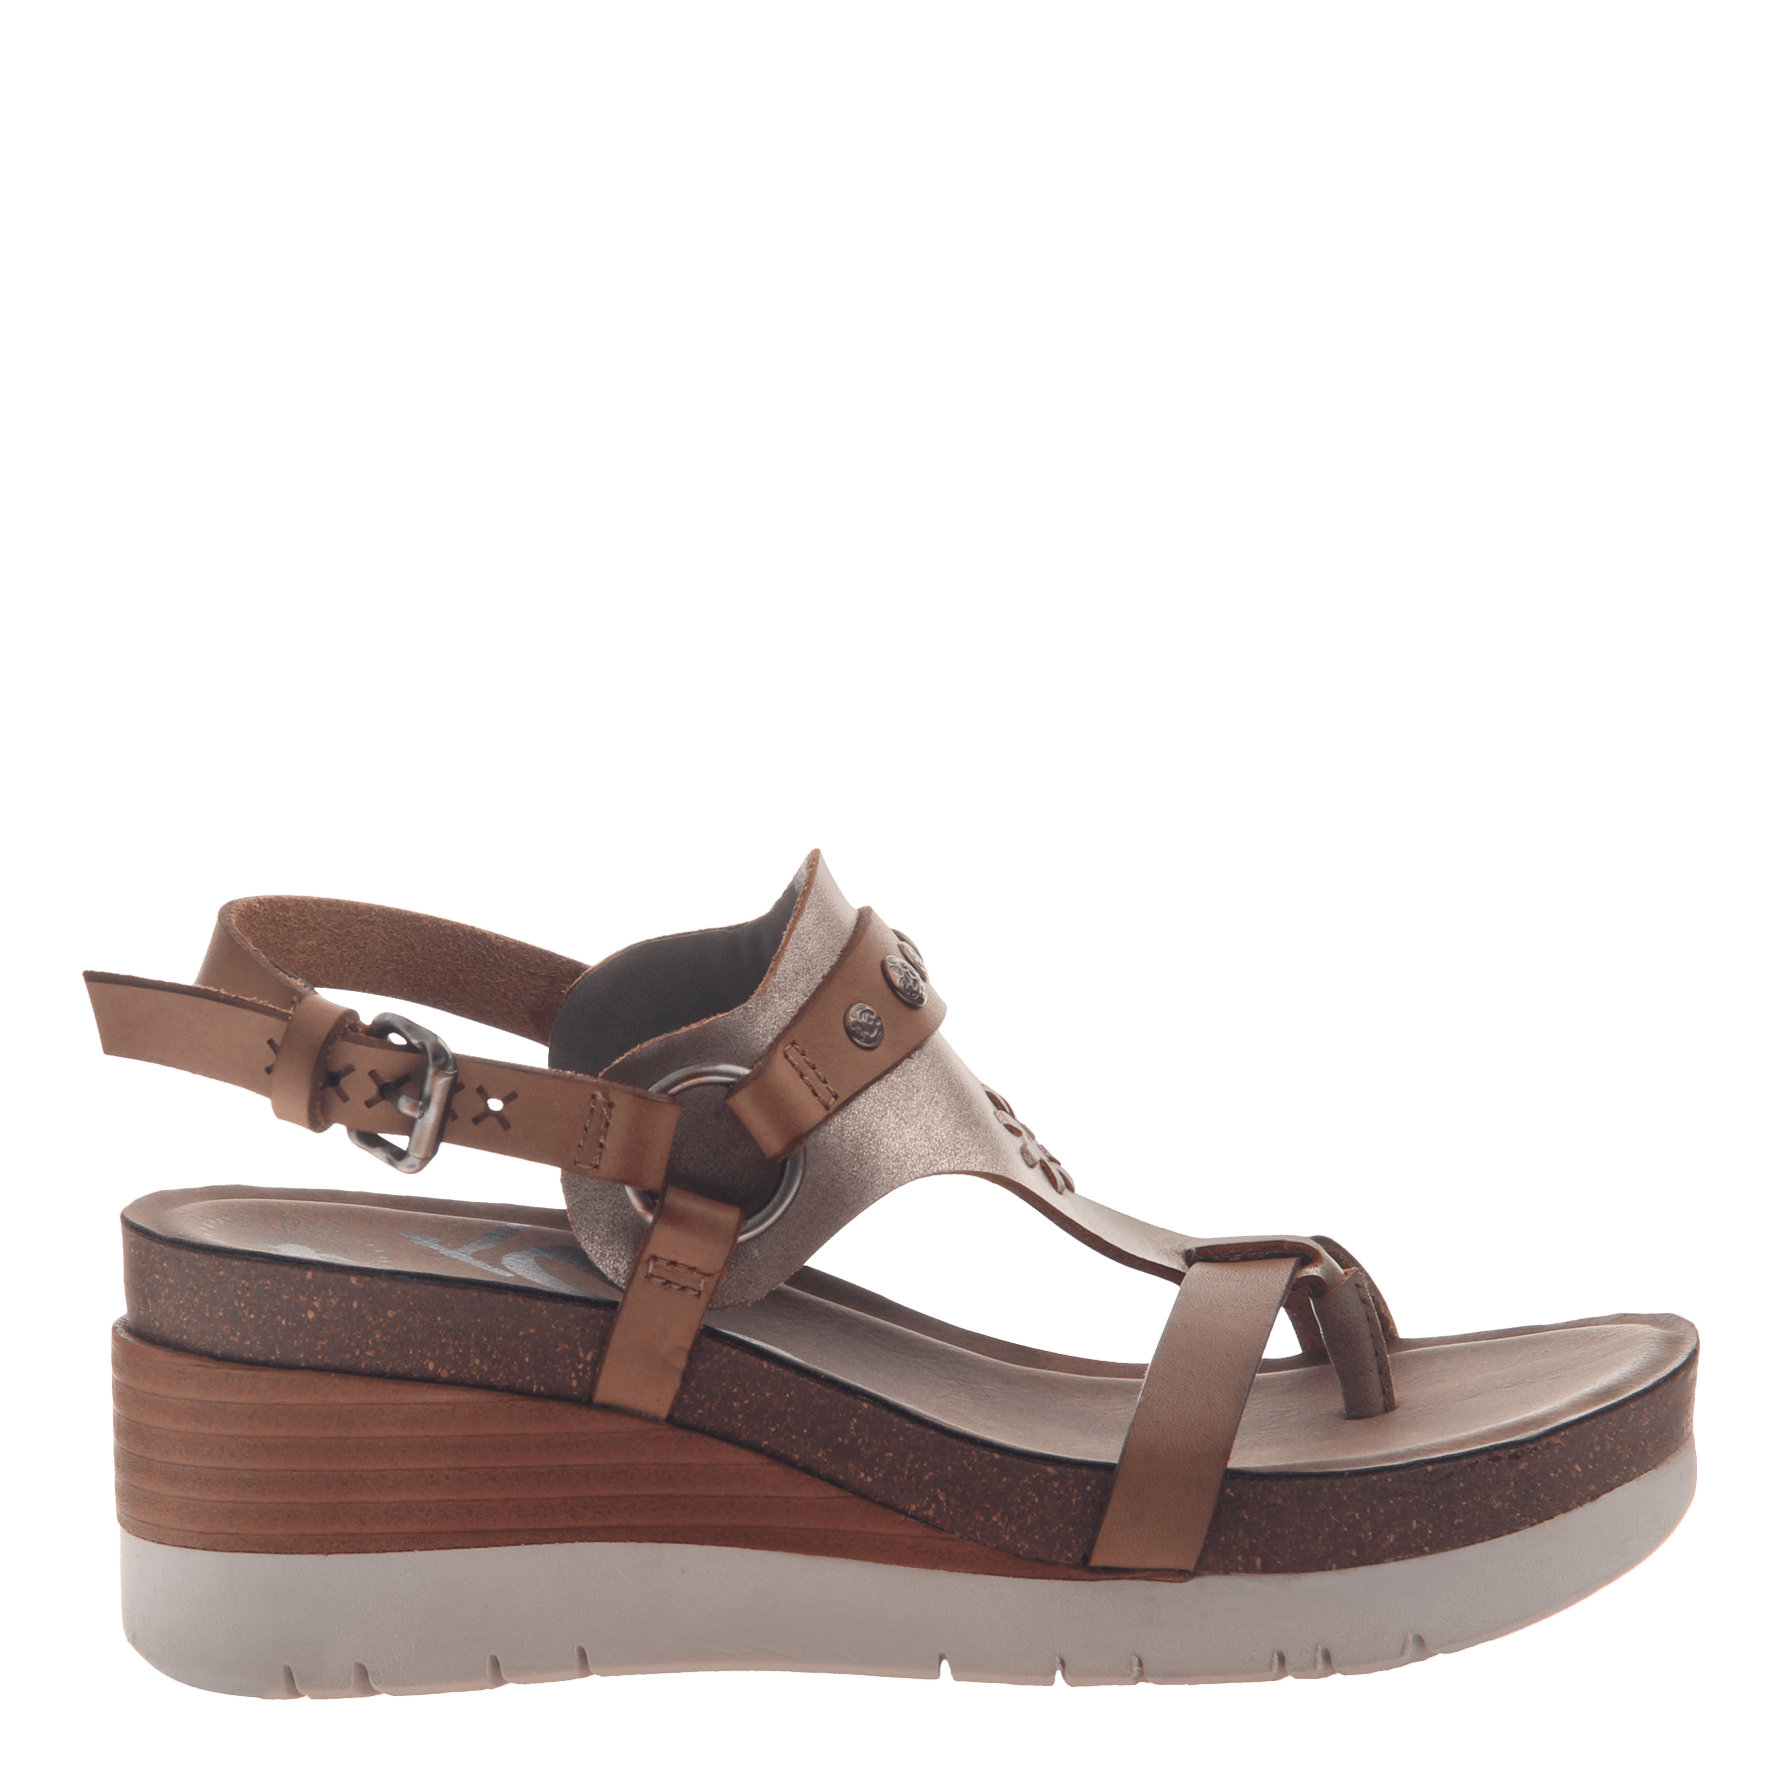 Maverick in New Taupe Wedge Sandals 